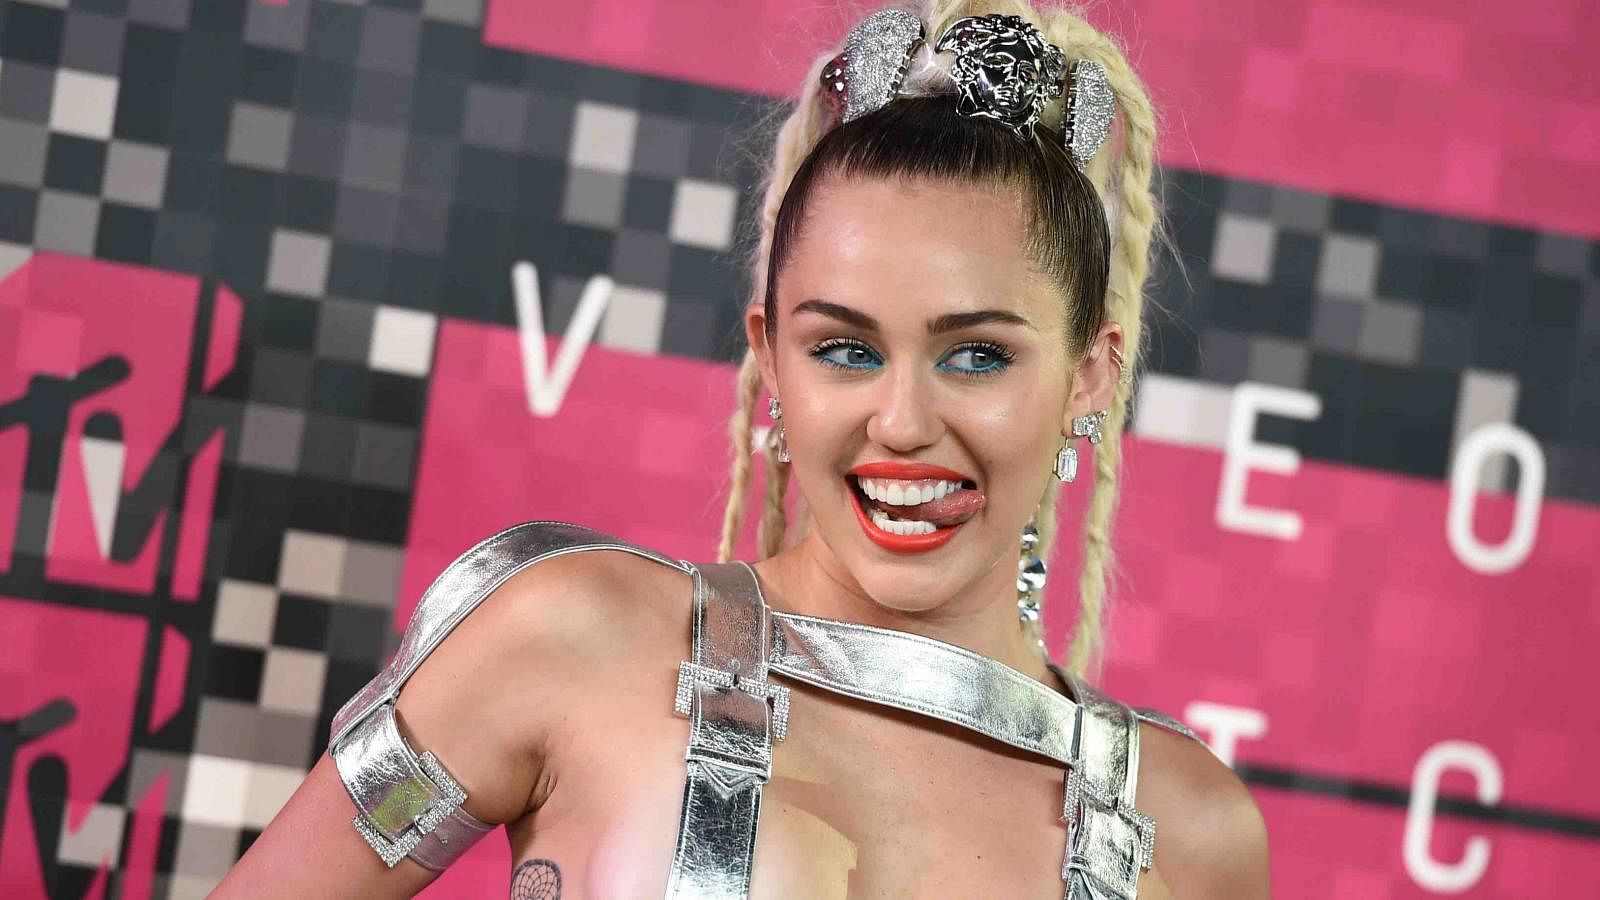 Miley Cyrus on the red carpet at the VMAs&nbsp;(Photo: AP)